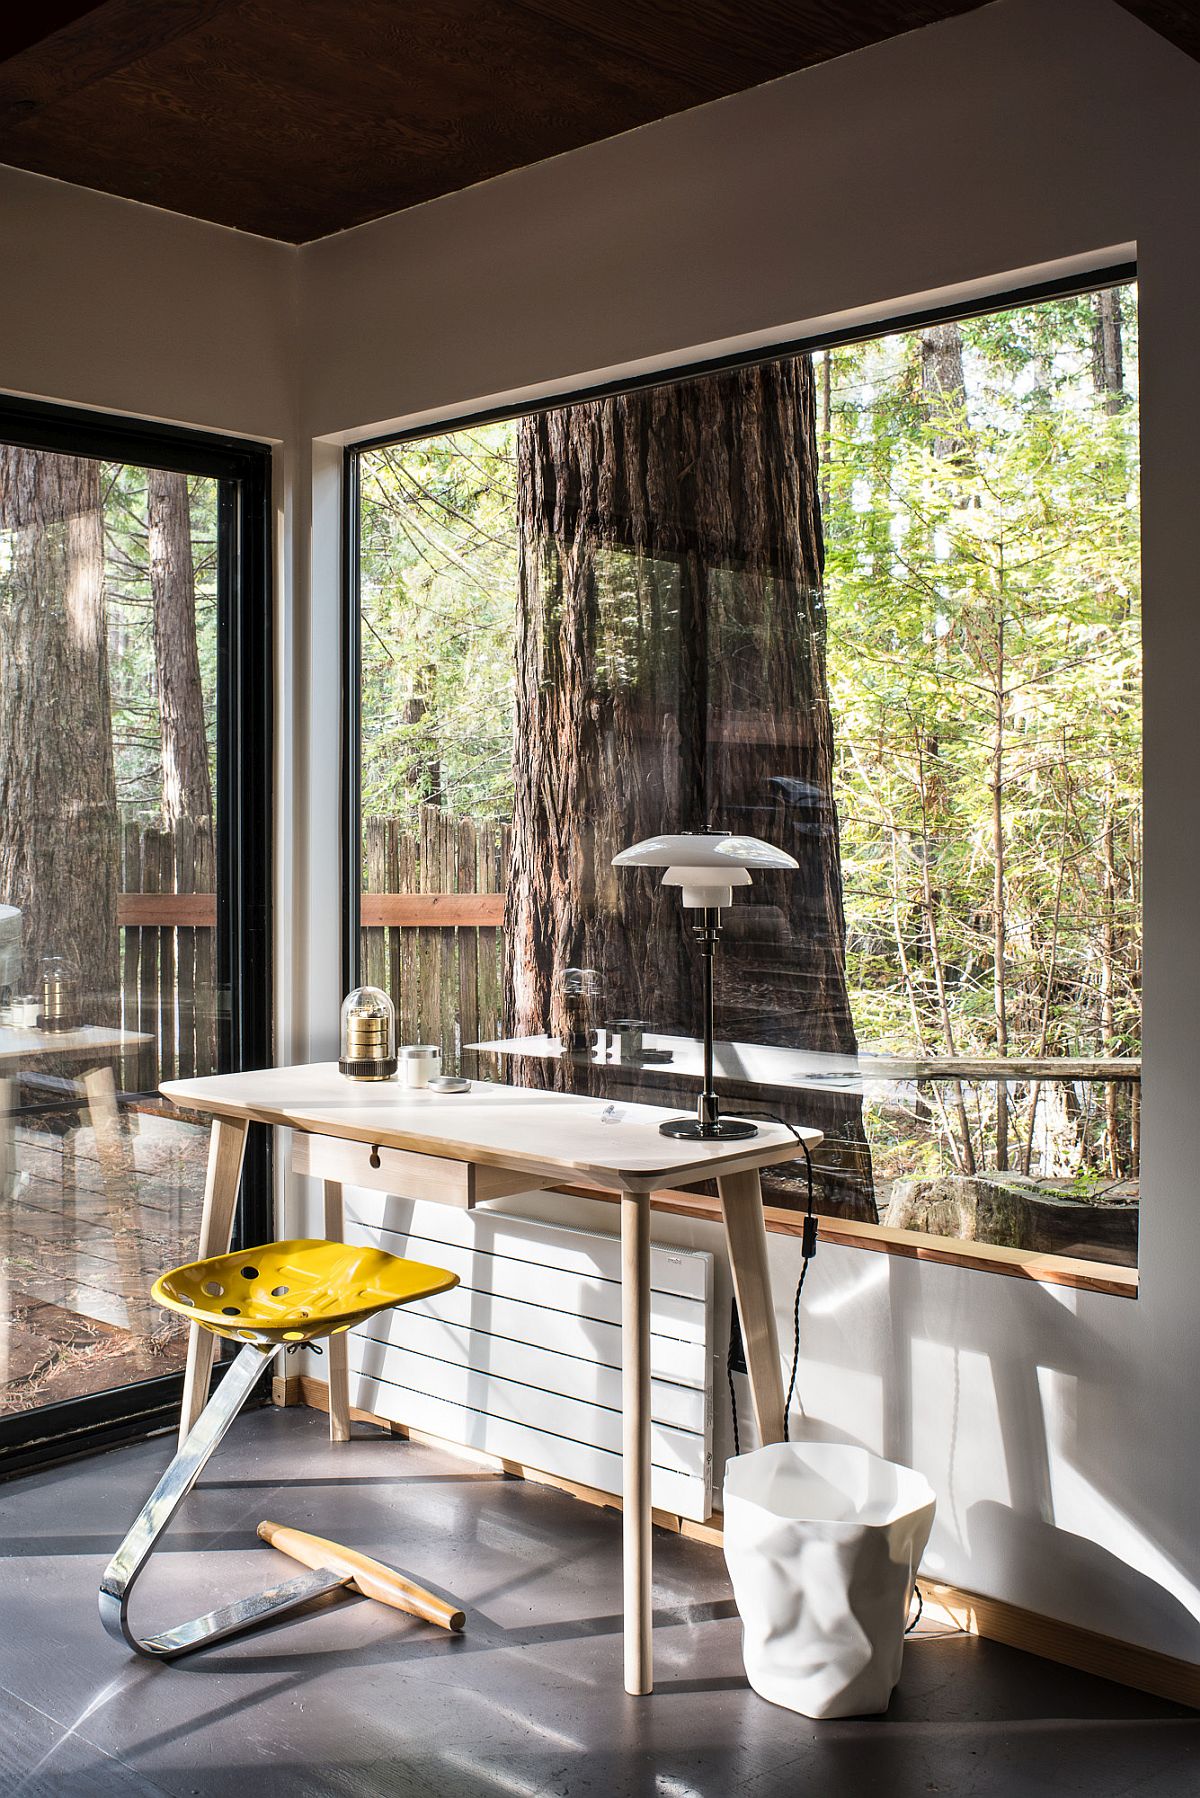 Beautiful work area of the cabin with forest view outside